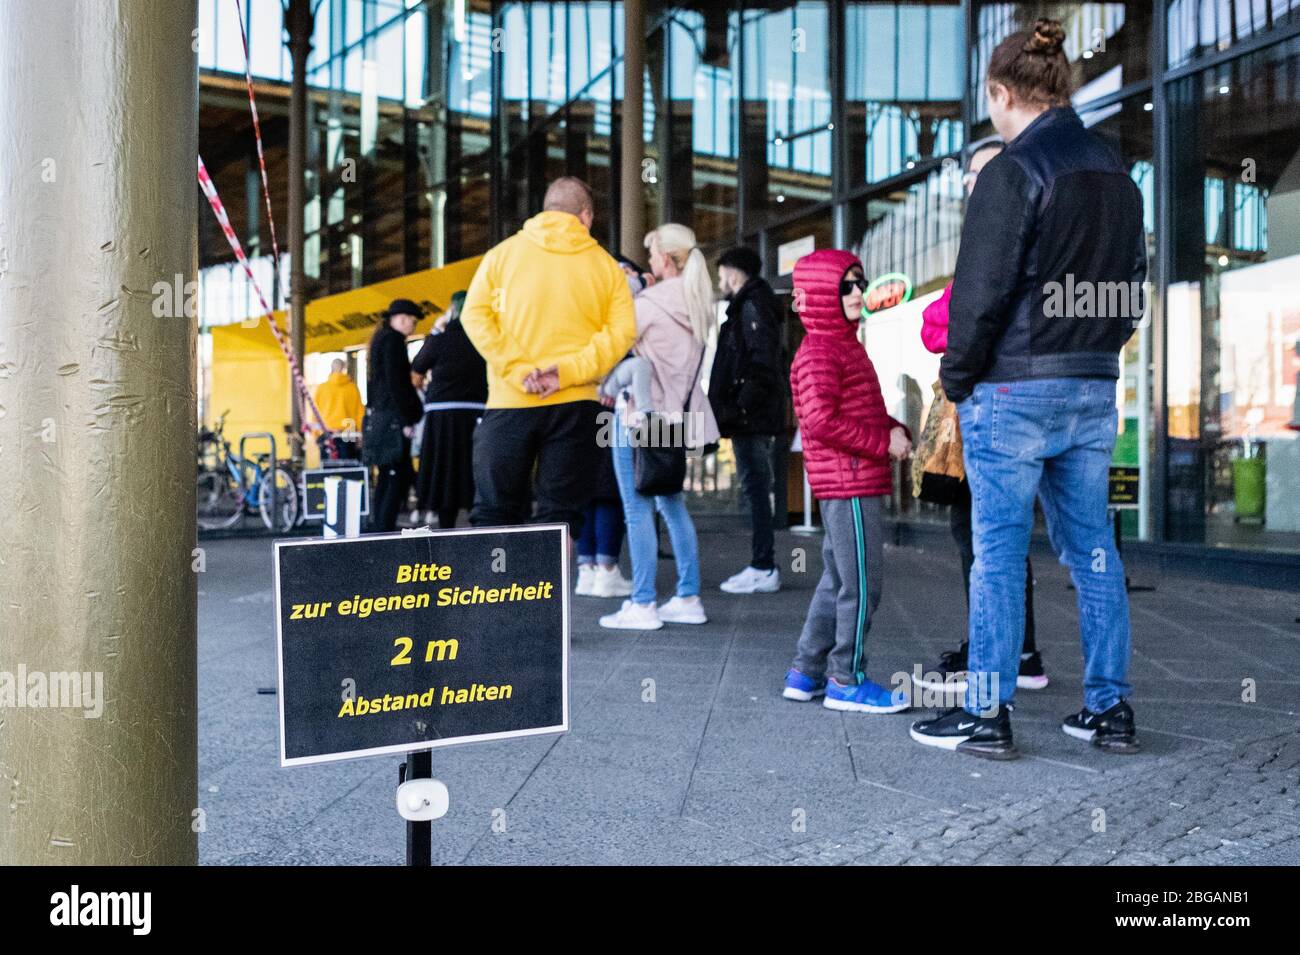 Berlin, Germany. 20th Apr, 2020. People queue to enter a bicycle shop in Berlin, capital of Germany, April 20, 2020. Starting from Monday, shops in Germany with a maximum sales area of up to 800 square meters are allowed to open under new regulations for hygiene as well as access and queue control. Credit: Binh Truong/Xinhua/Alamy Live News Stock Photo